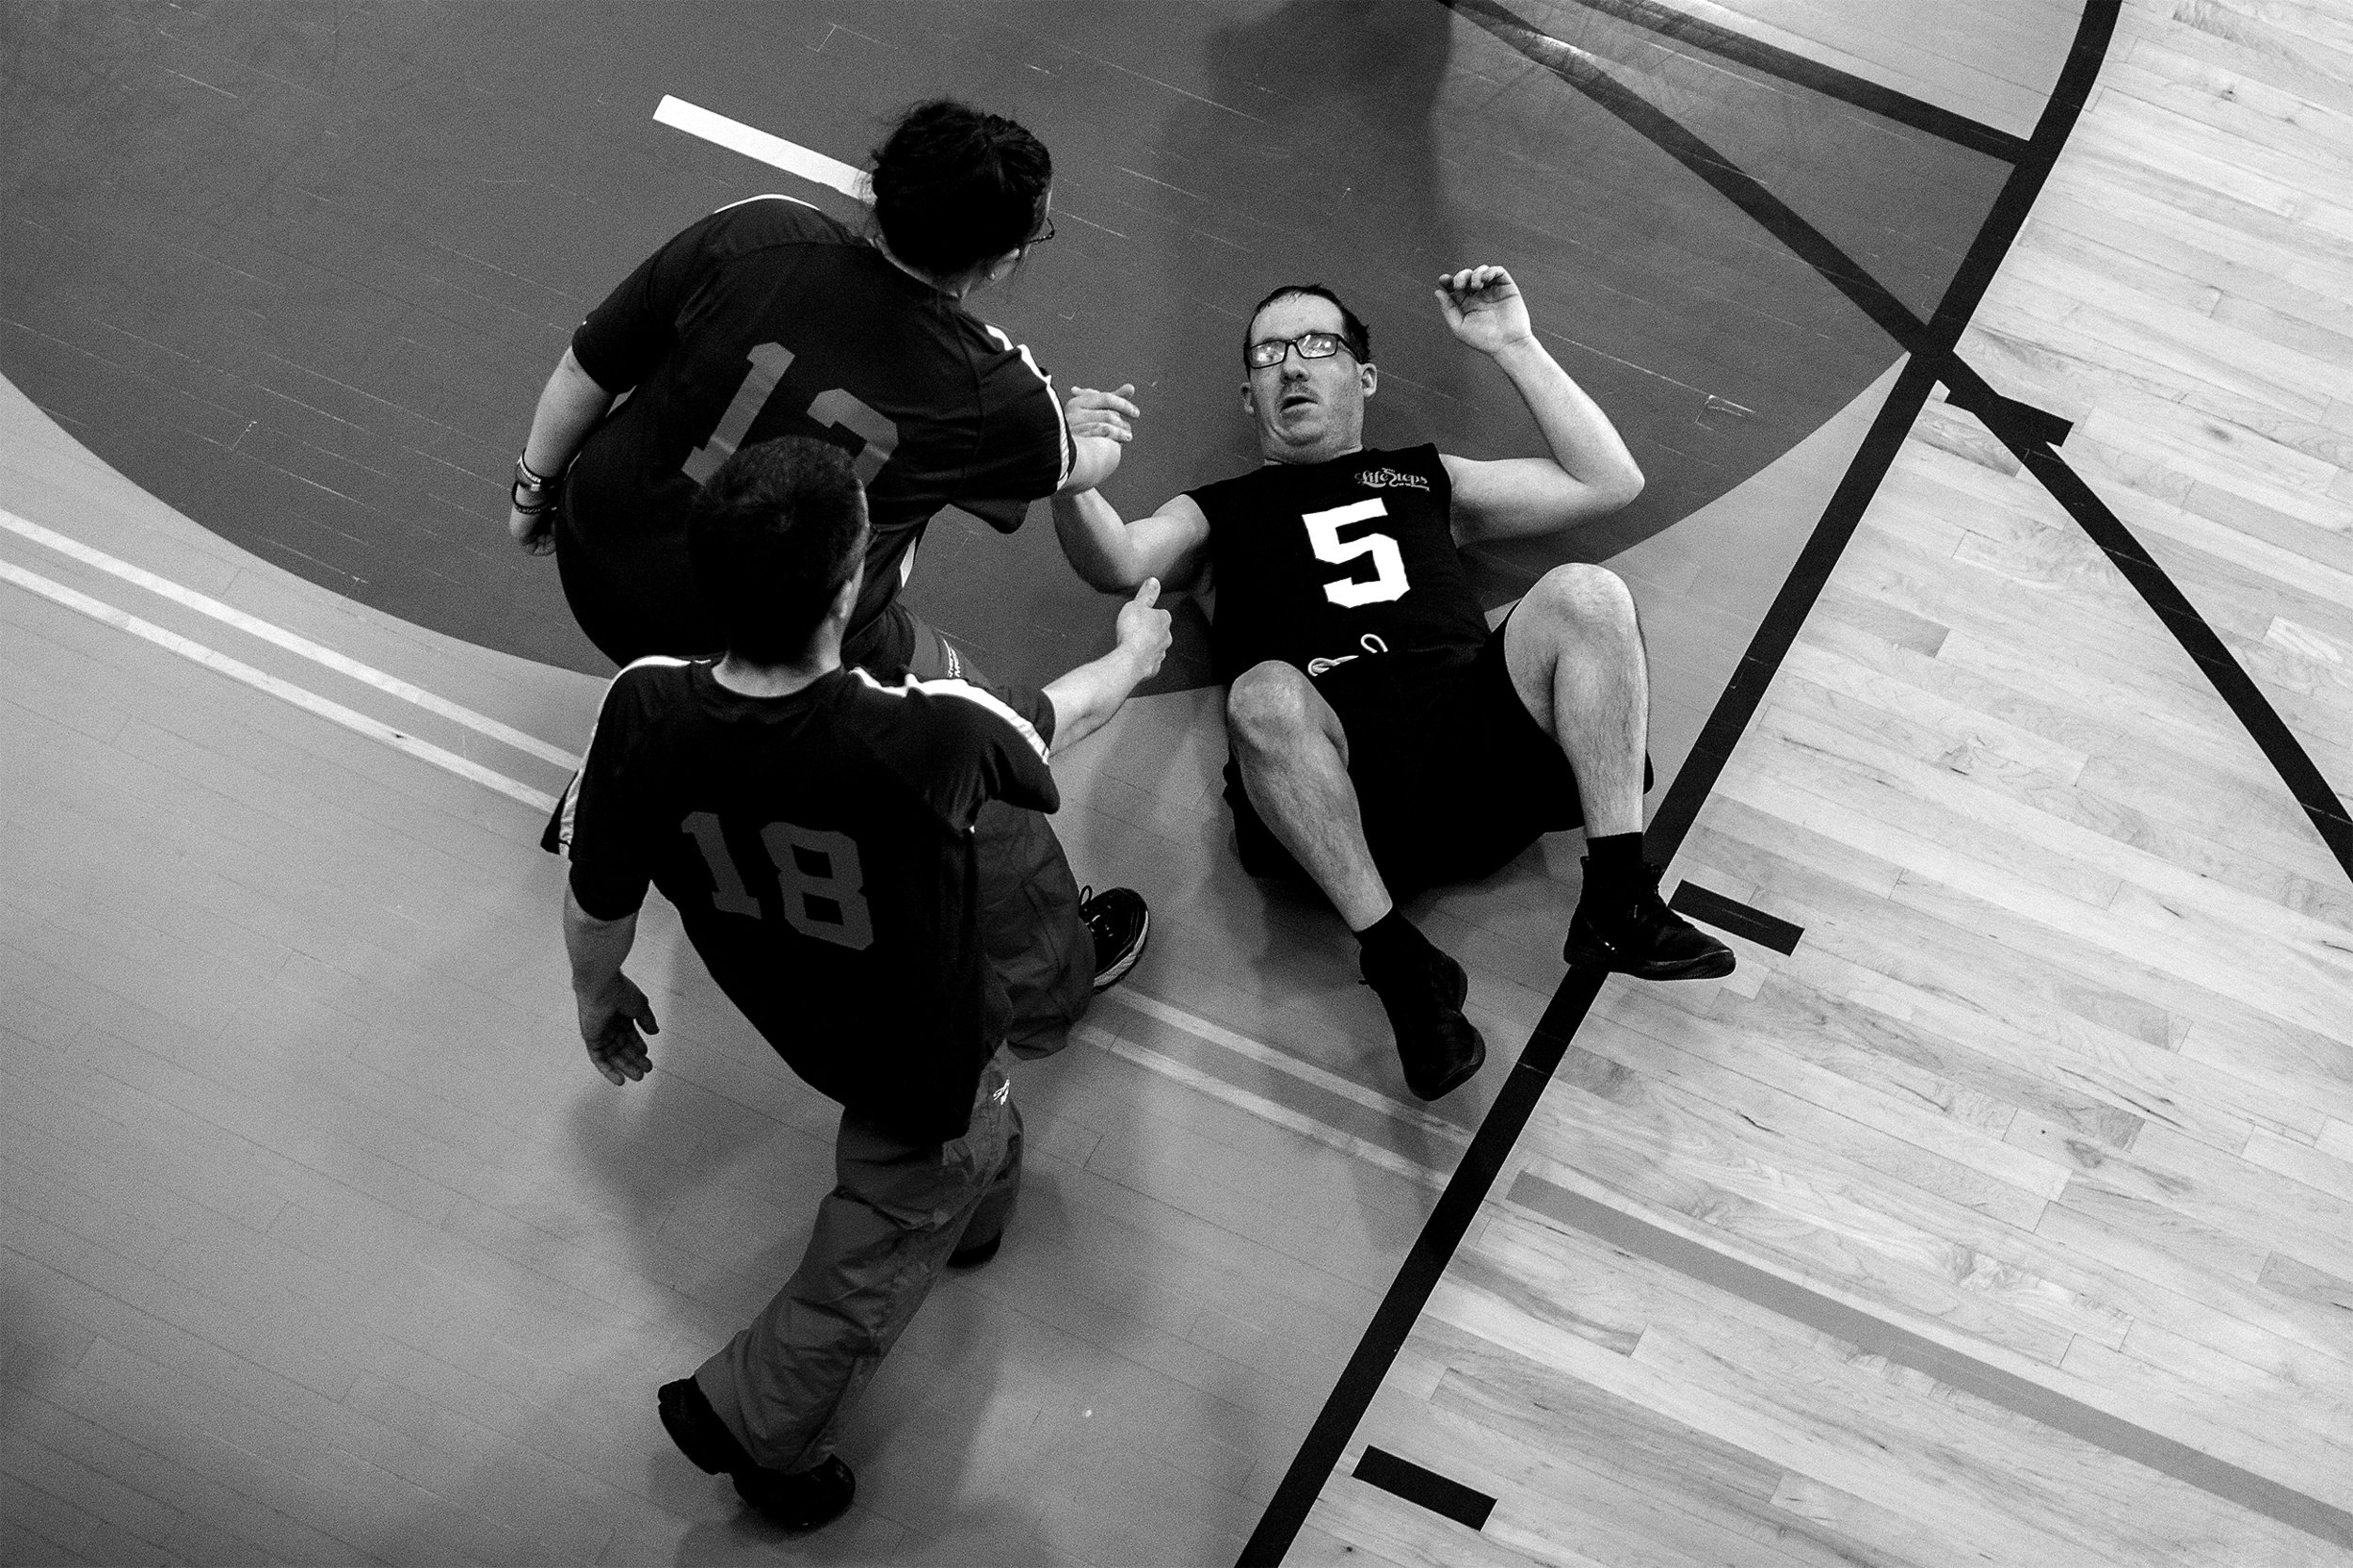  Billy Buckey is helped to his feet by rival players Amber Trieber and Jackson Ventling, (18) during the basketball competition of the Special Olympics Area Games on Thursday, April 11, 2019. For many of the athletes competing the family and camarade